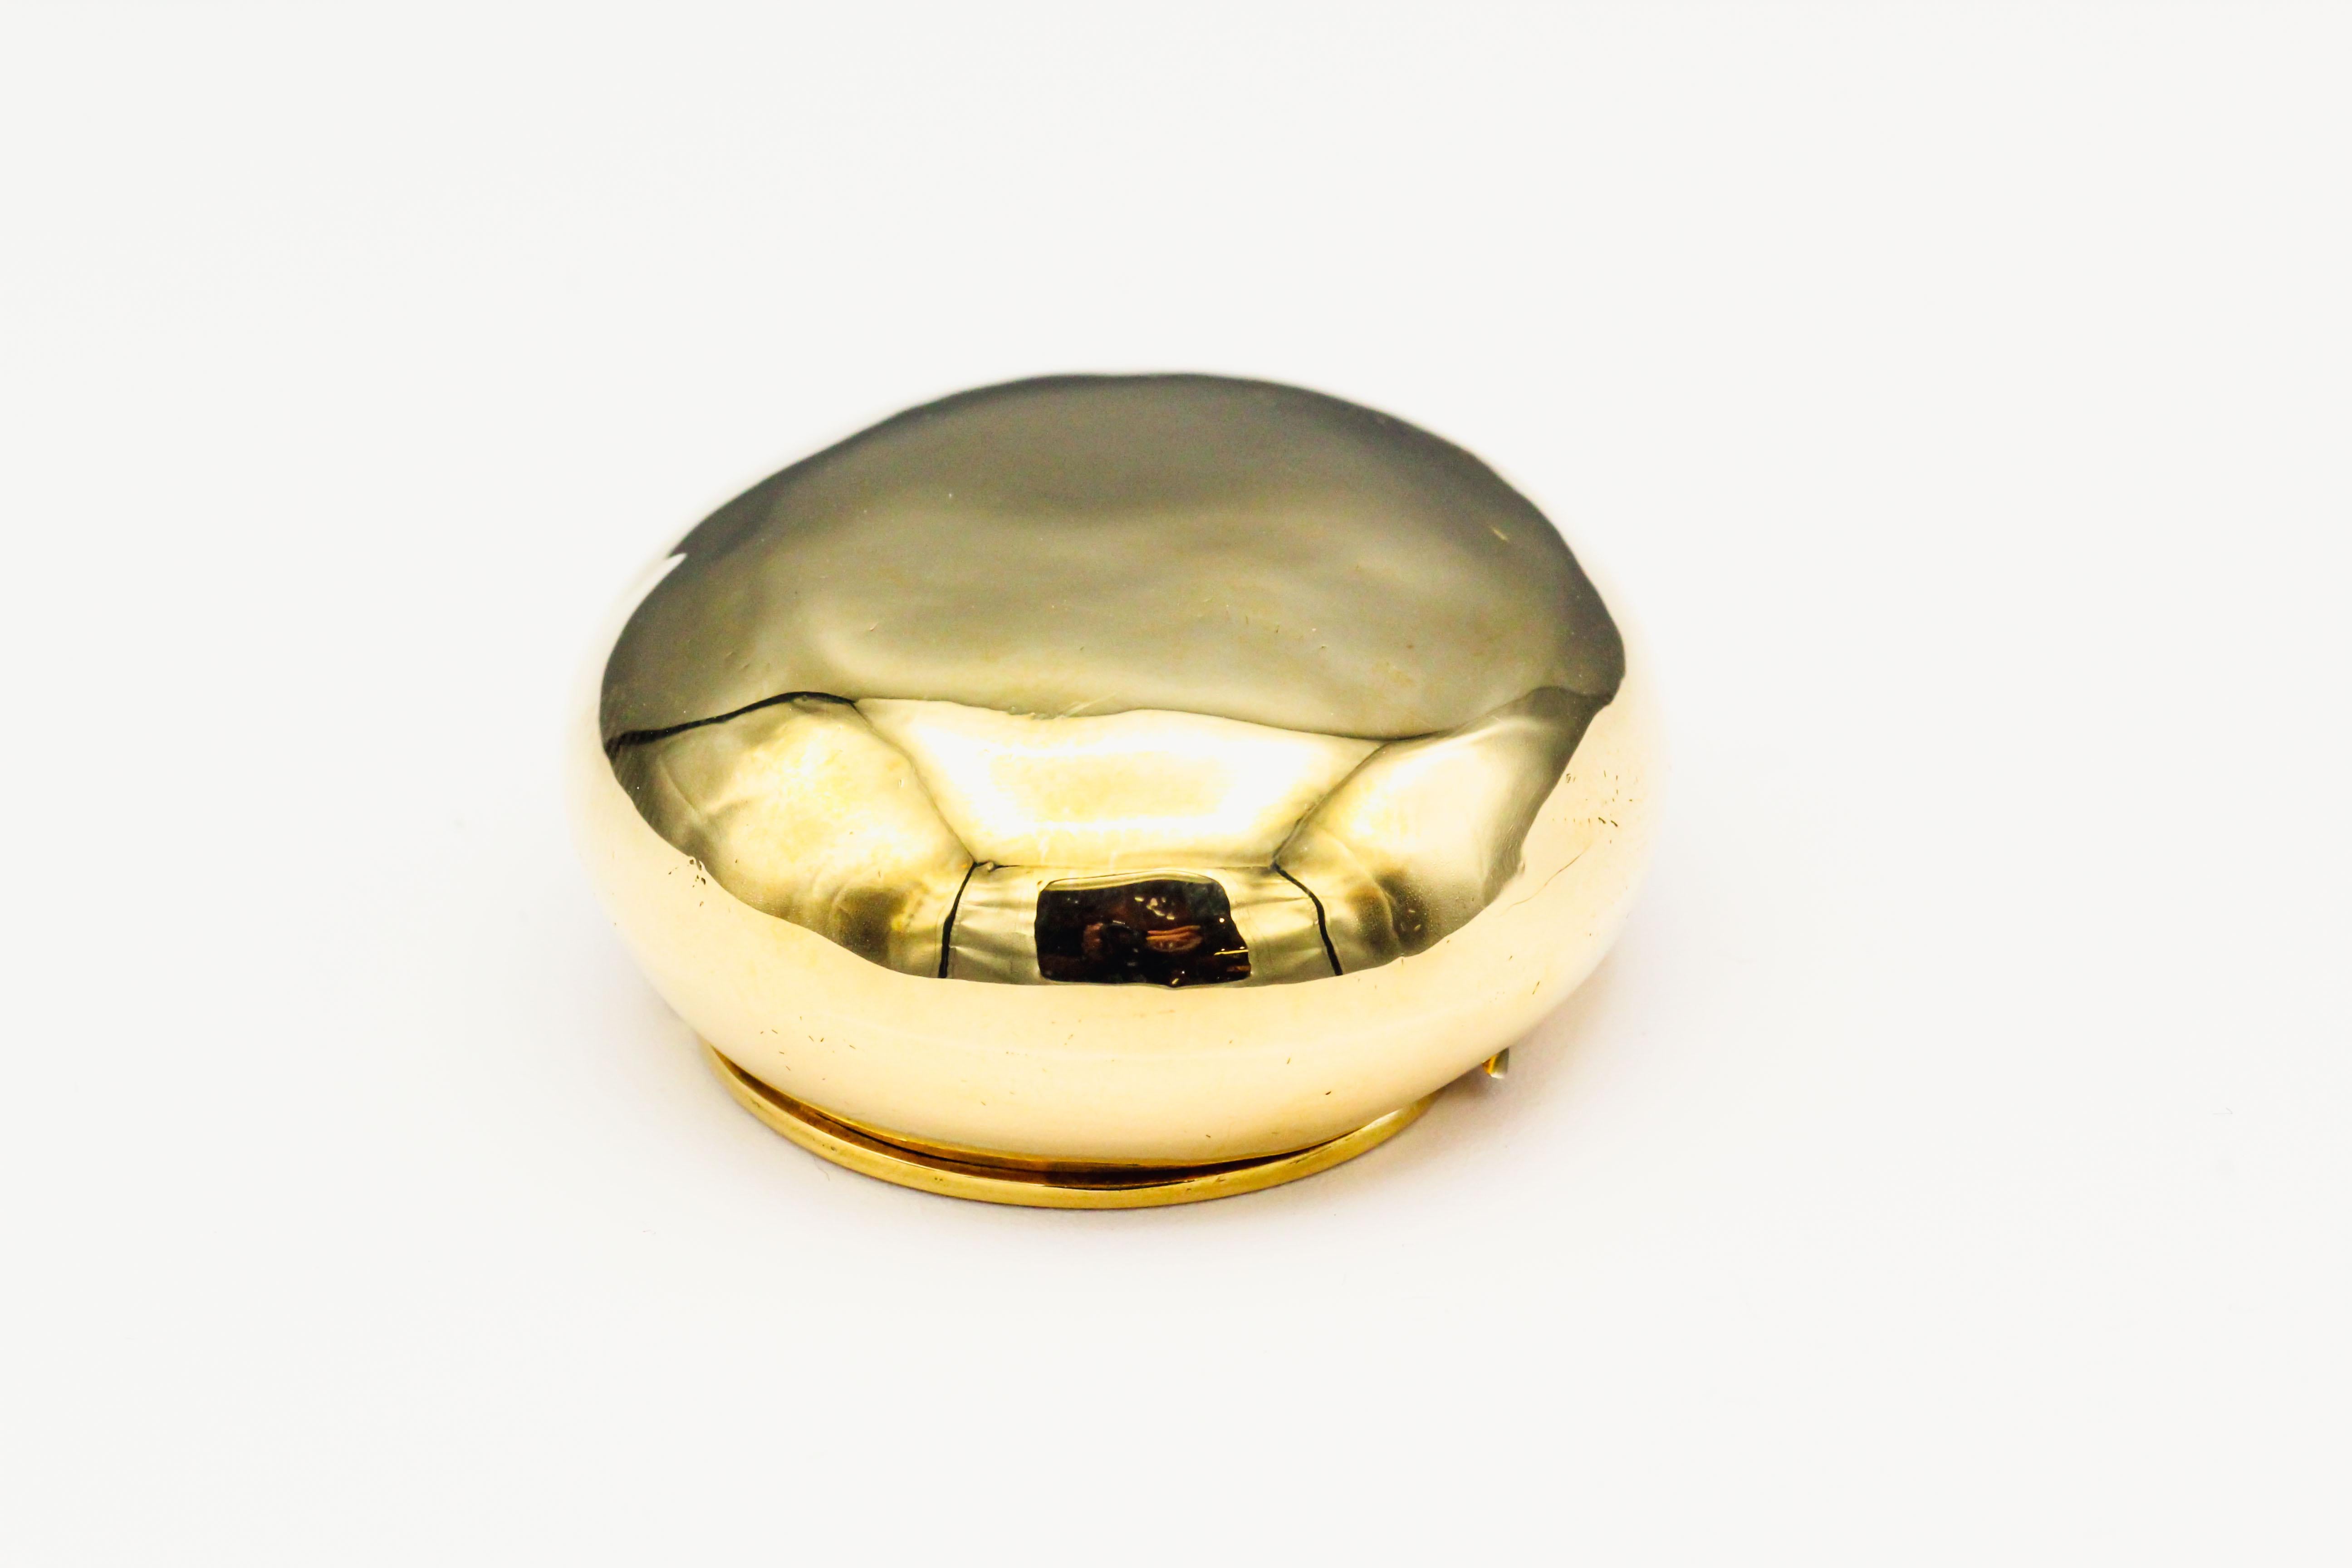 Fine 18K yellow gold pill box by Tiffany & Co. Schlumberger. It is designed to resemble an oval pebble, or rock. Beautifully made with a flat base. Superb workmanship.

Hallmarks: Tiffany & Co., Schlumberger